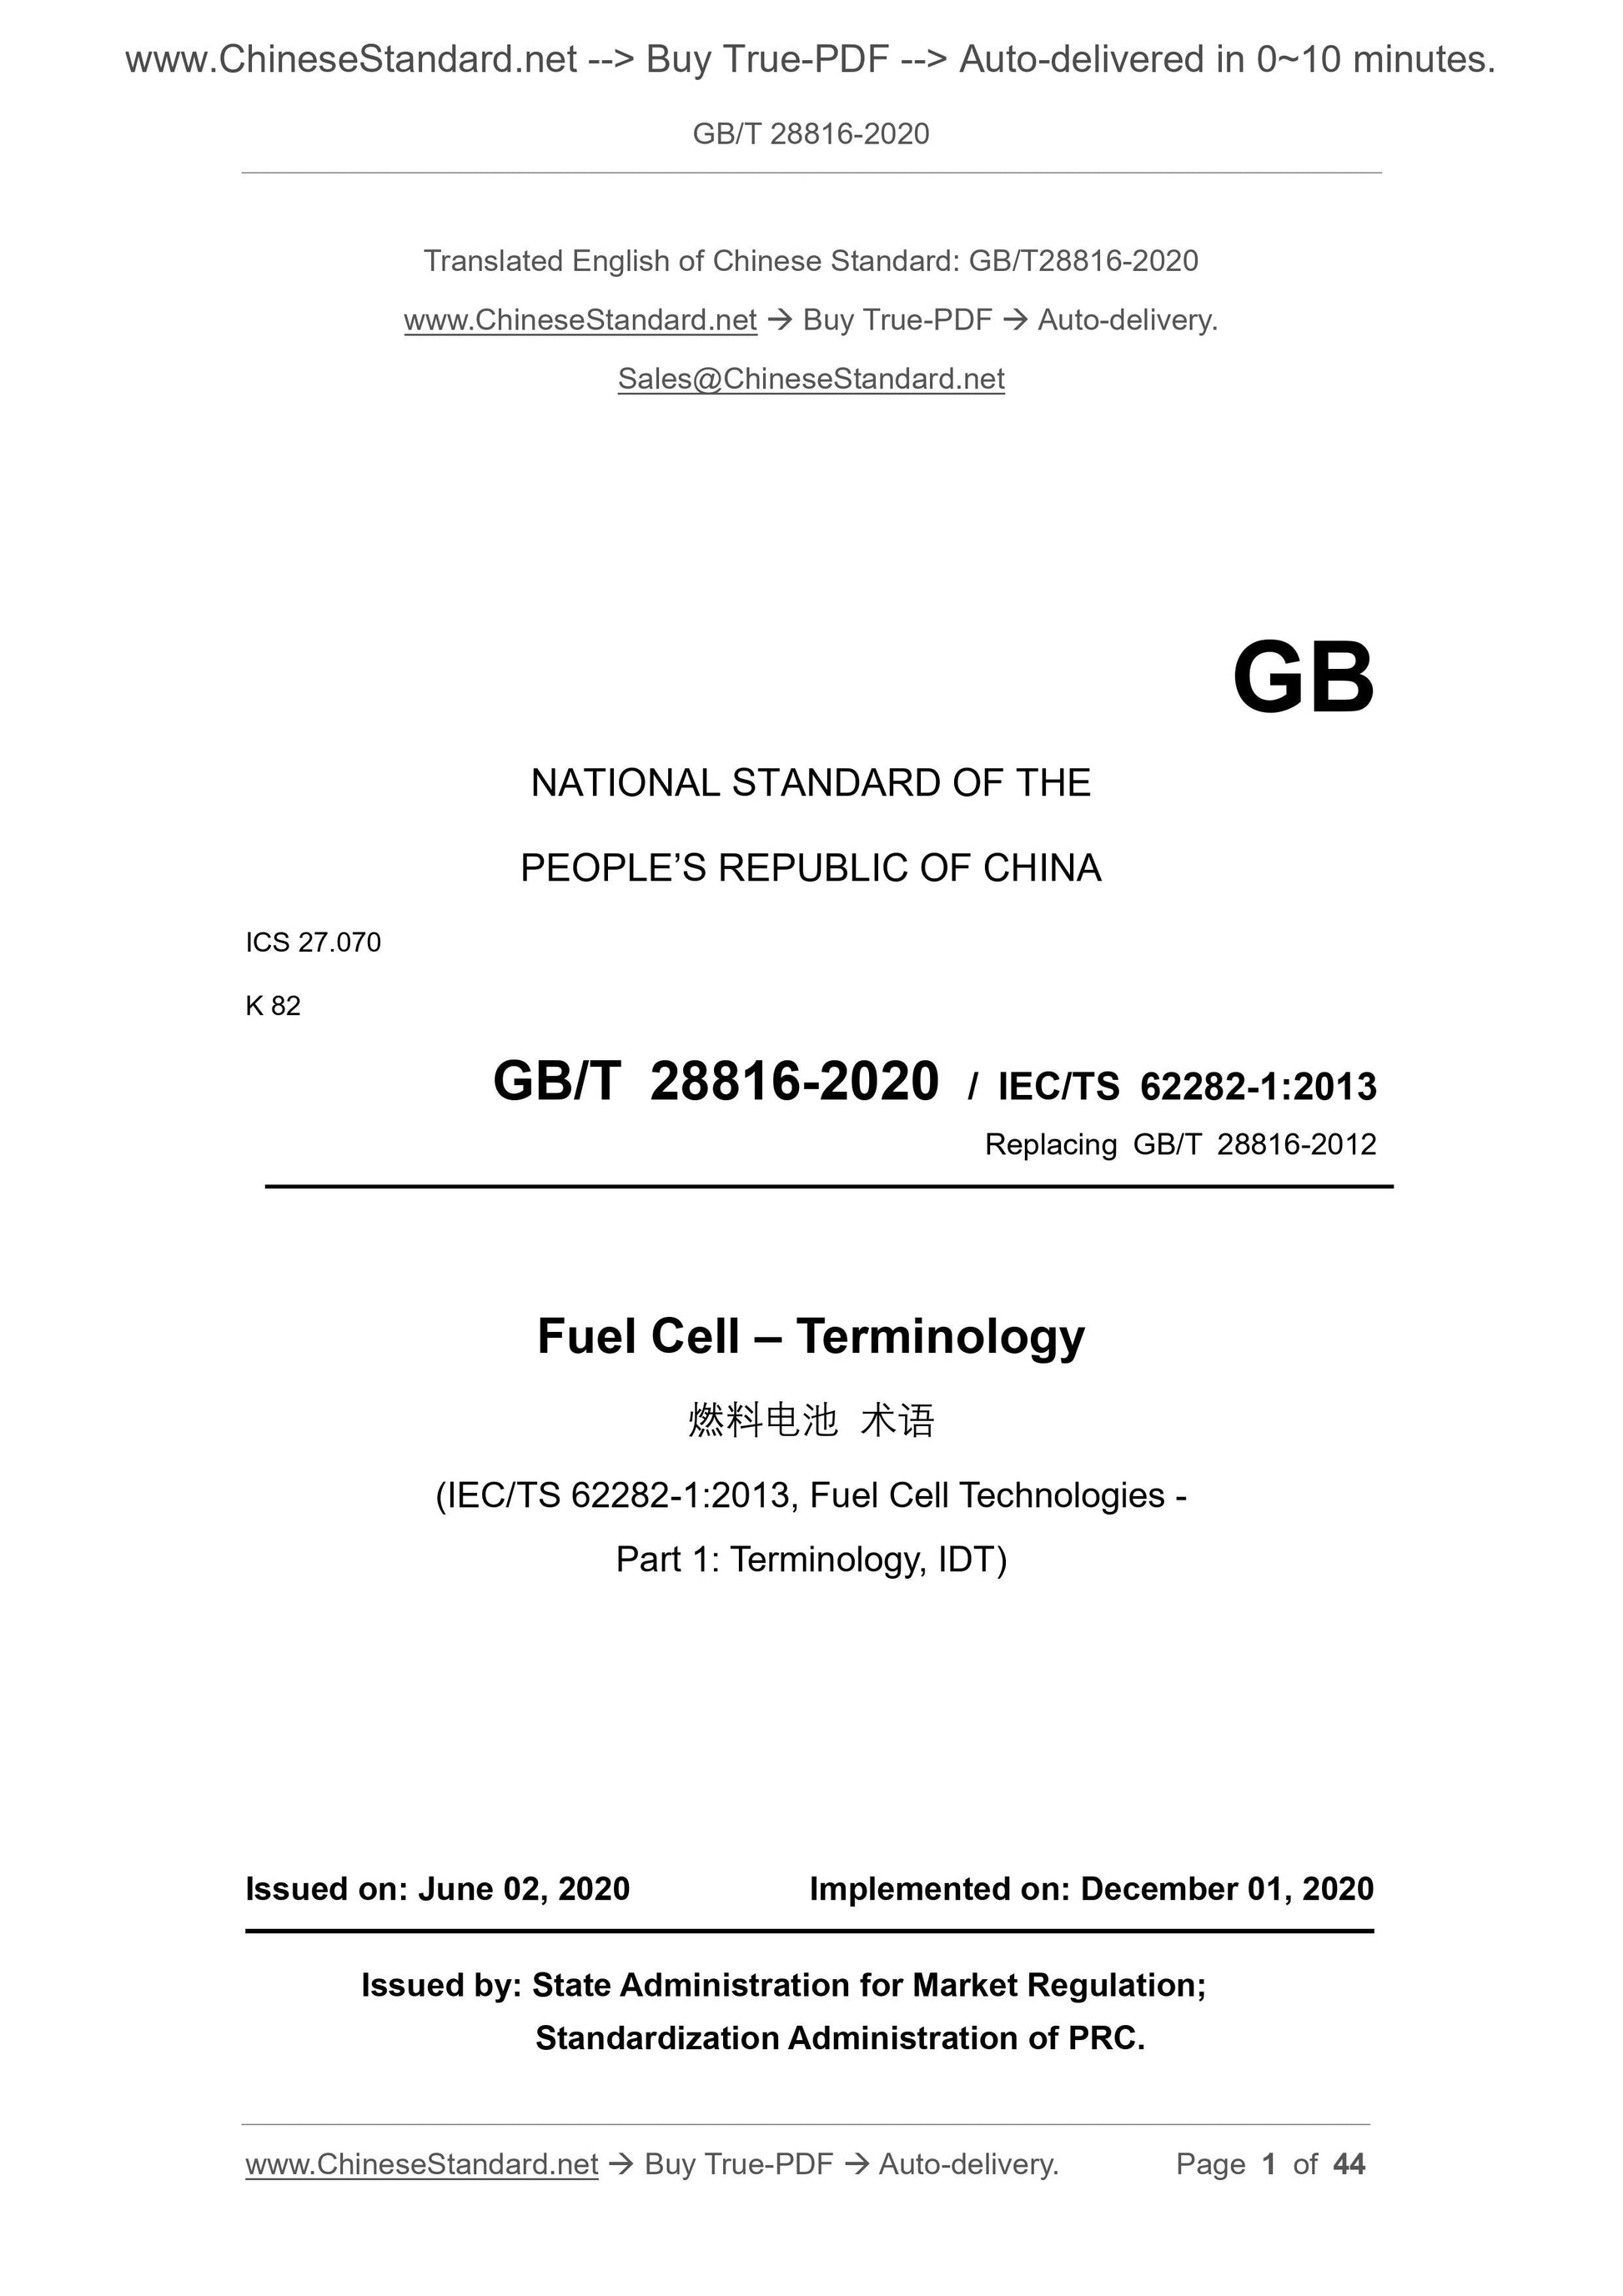 GB/T 28816-2020 Page 1